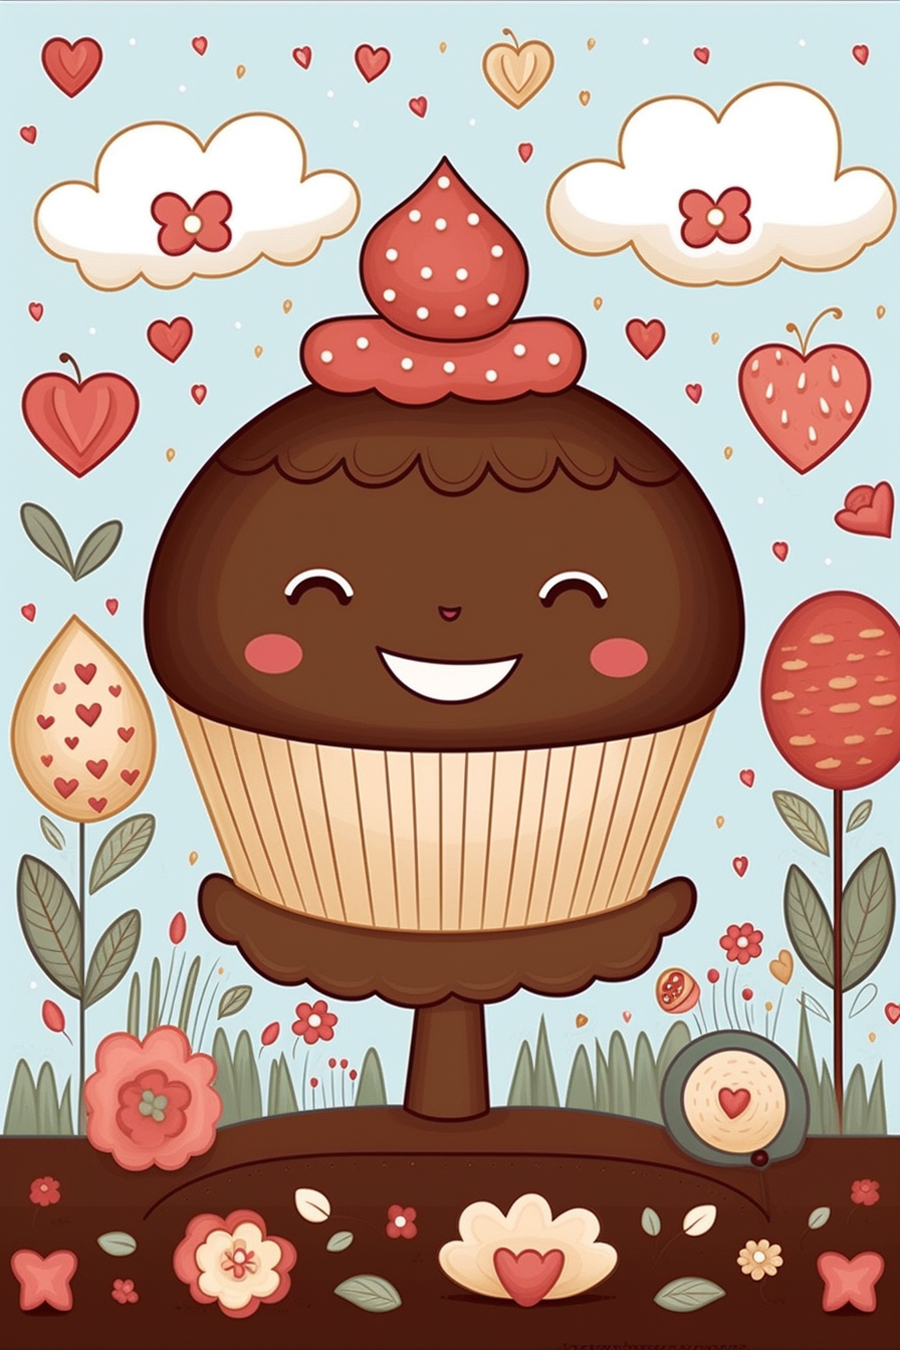 A cartoon cupcake with hearts and flowers in the background.